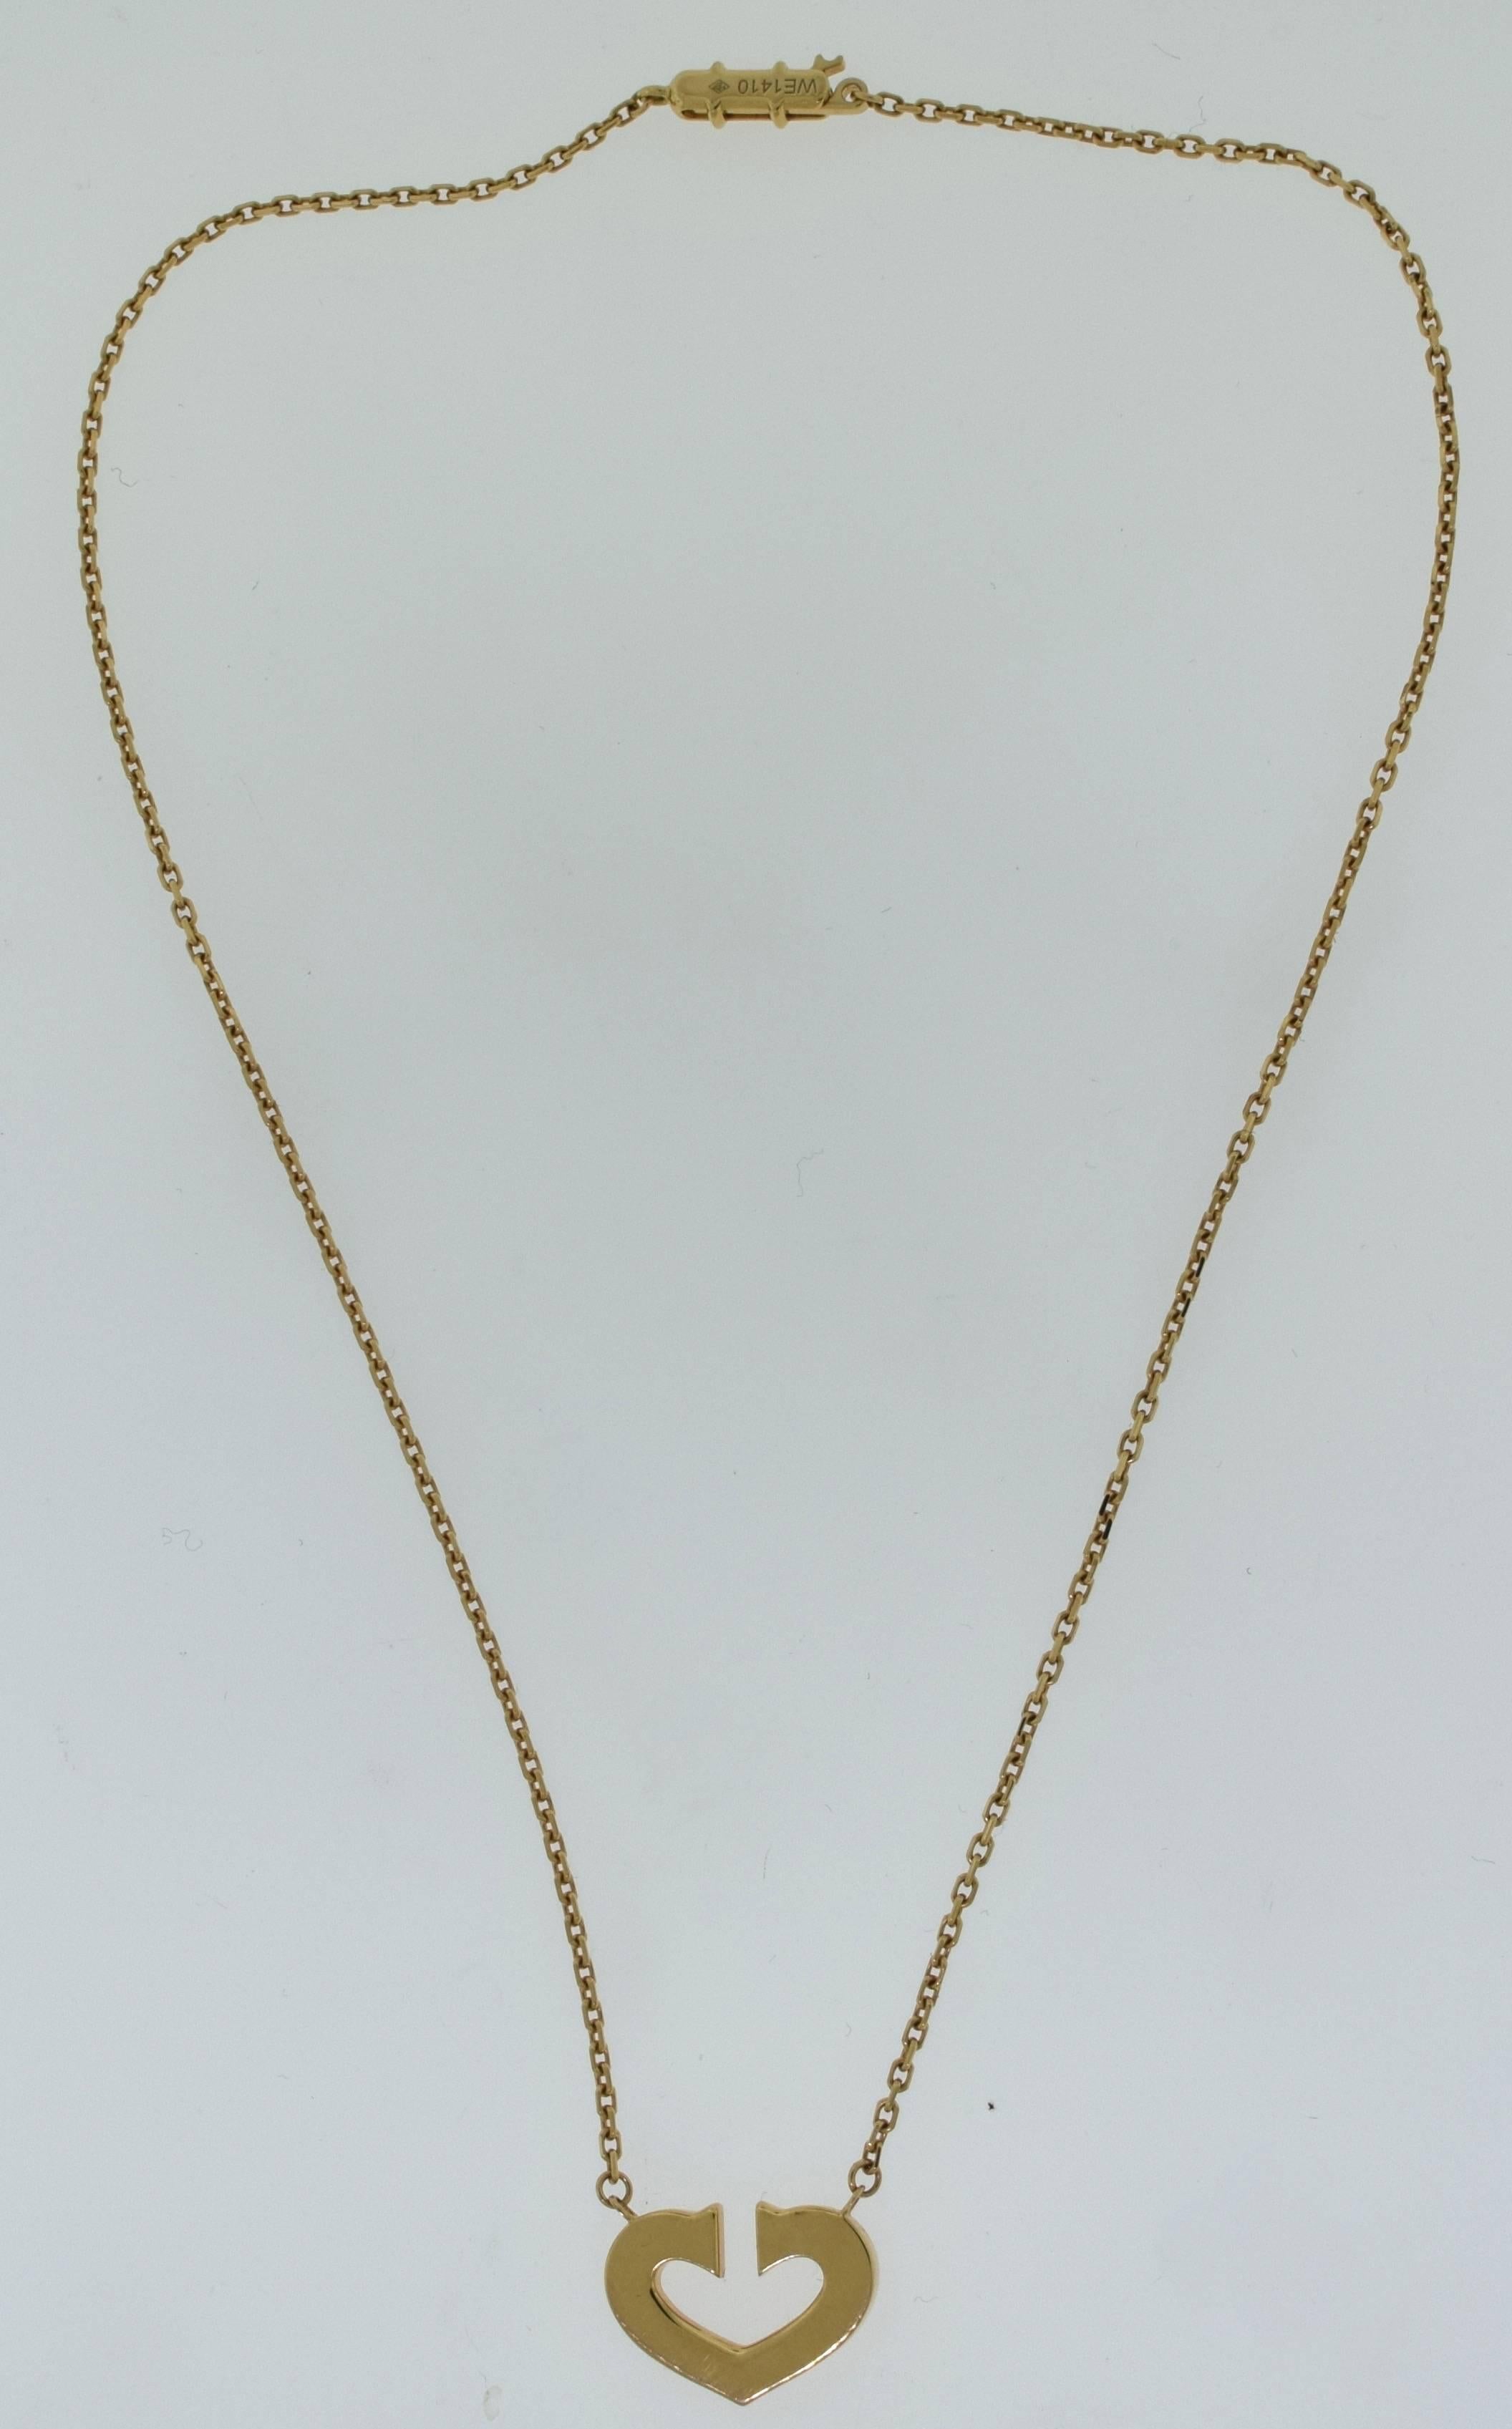 Designer: Cartier
Collection: C Heart of Cartier
Metal: Rose Gold
Metal Purity: 18k
Total Item Weight (grams): 6.88 grams
Necklace Length: 14 inches
Collateral: Box